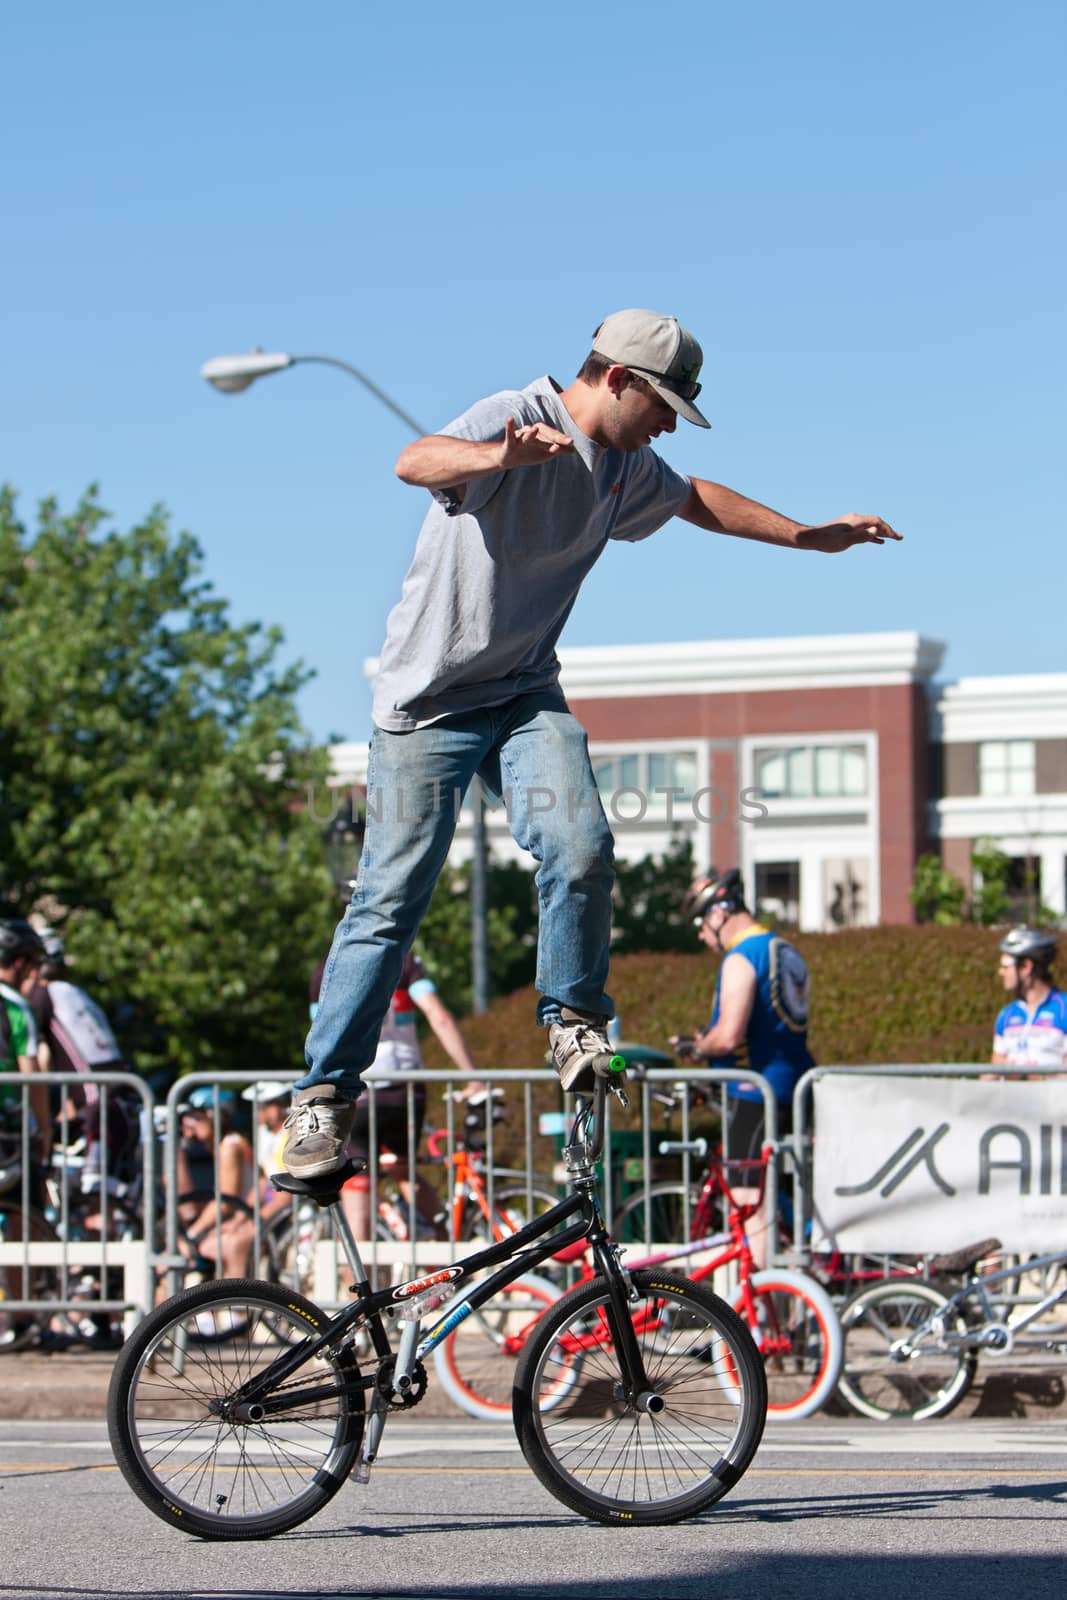 Athens, GA, USA - April 26, 2014:  A young man practices his flatland tricks before the start of the BMX Trans Jam competition on the streets of downtown Athens.